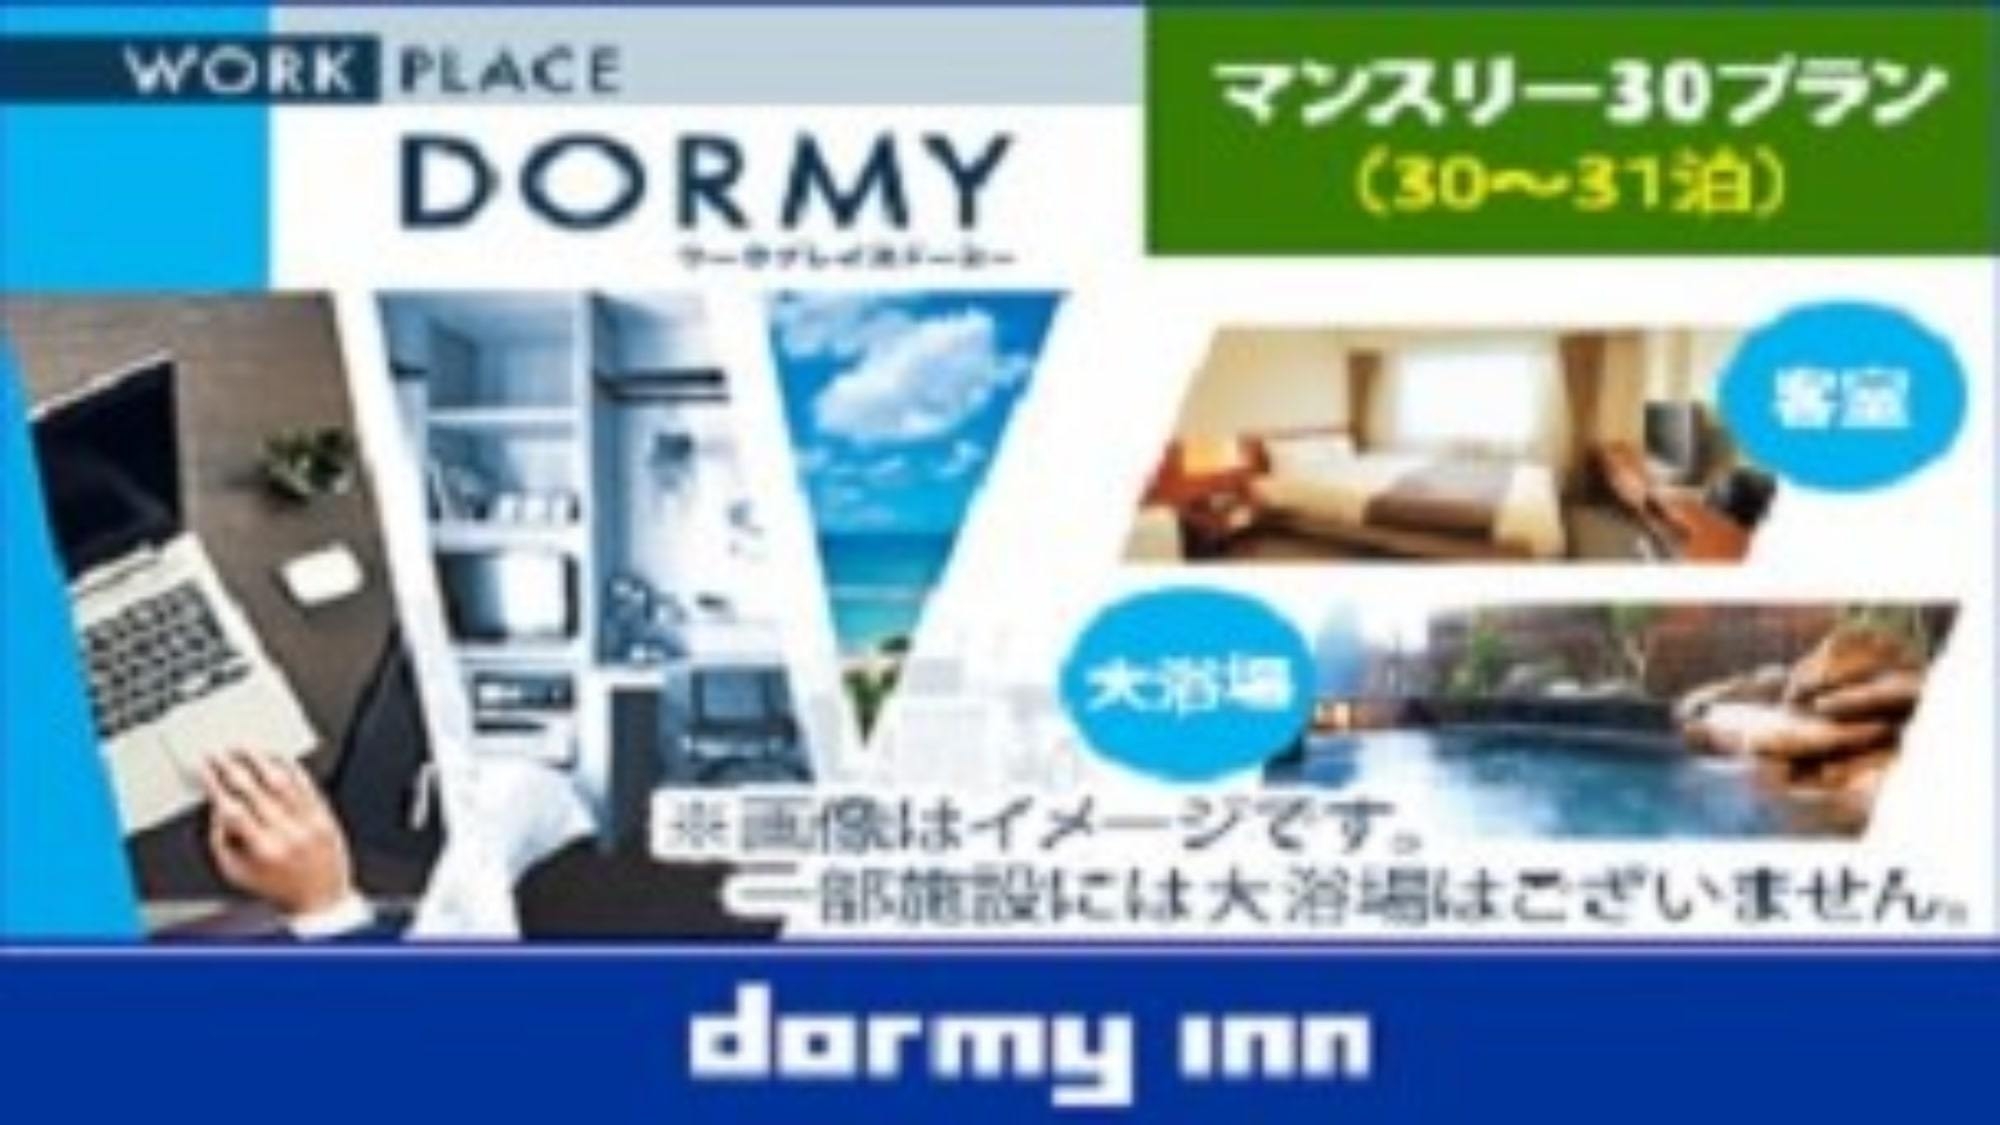 【WORK PLACE DORMY】マンスリープラン（30〜31泊）朝食付き